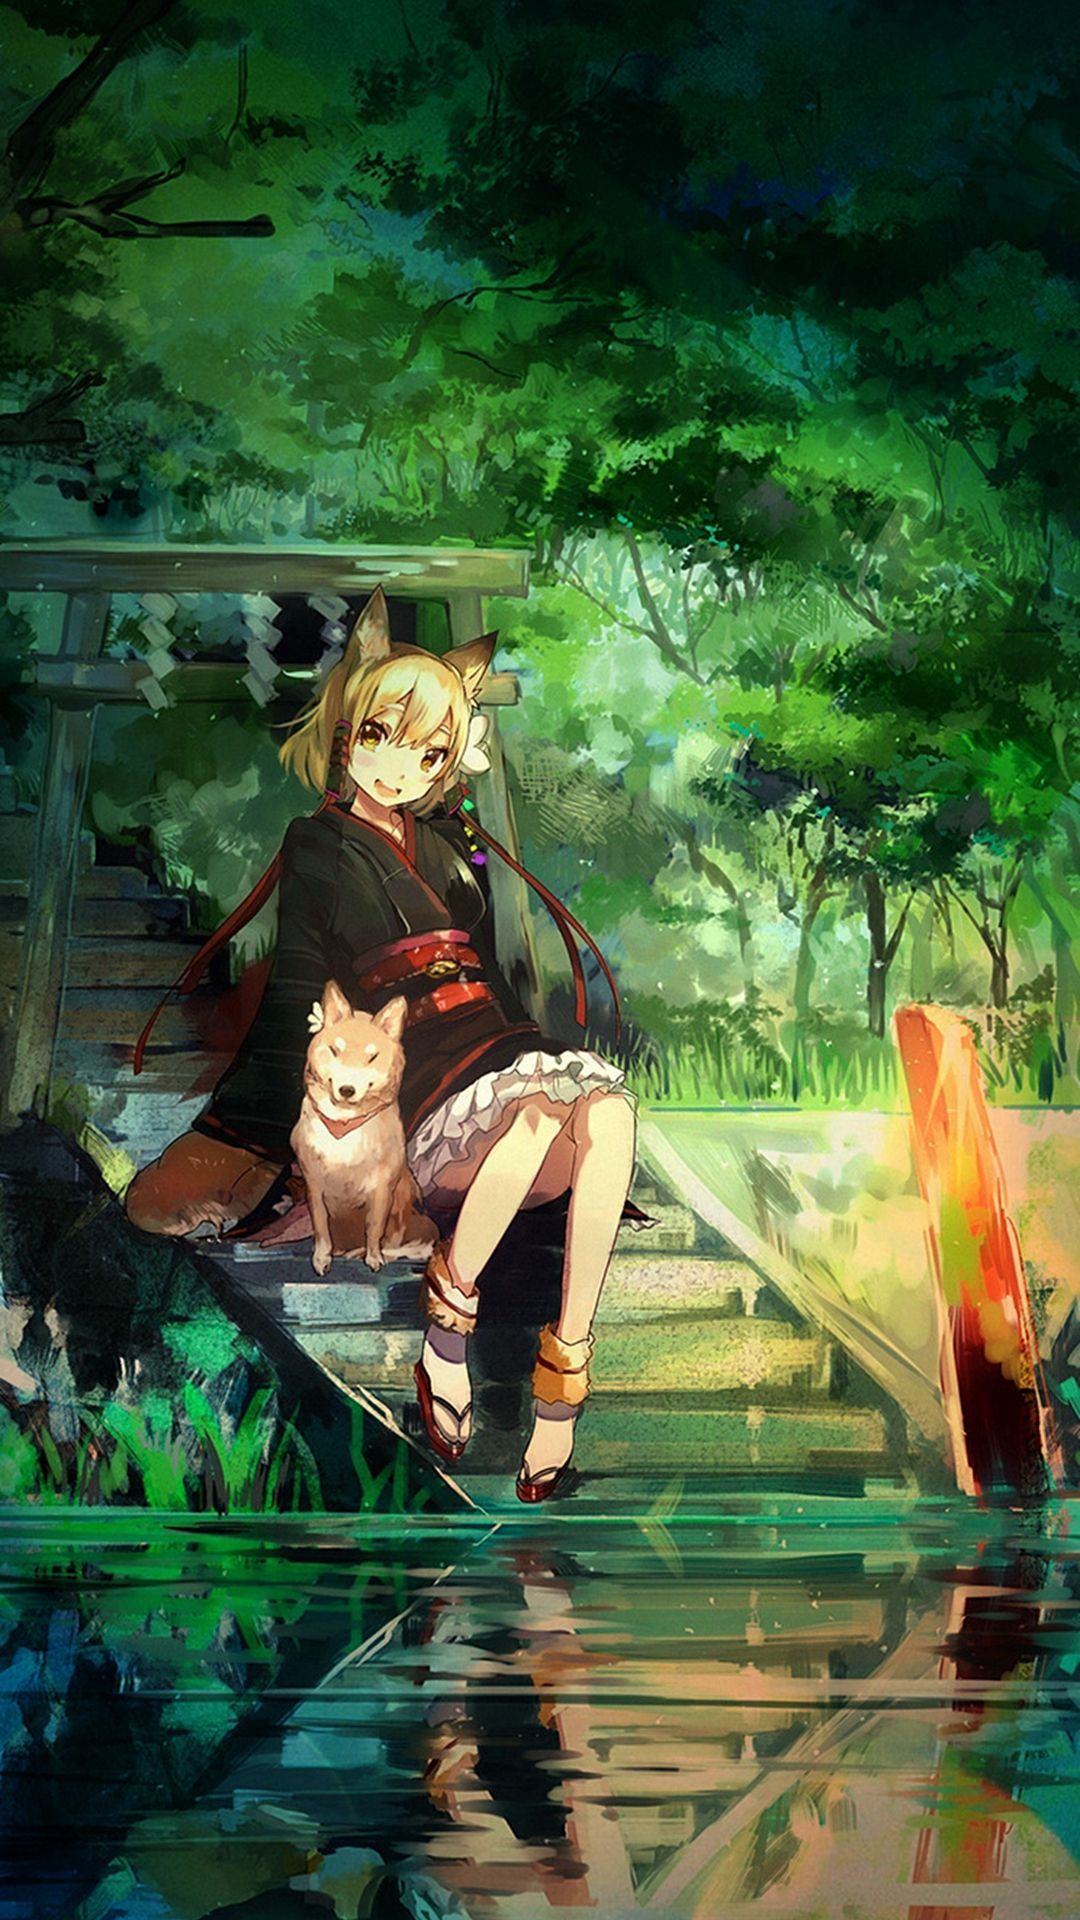 Girl And Dog Green Nature Anime Art Illust IPhone 6 Wallpaper Download. IPhone Wallpaper, IPad Wallpaper One Stop Download. Anime Art, Anime Wallpaper, Anime